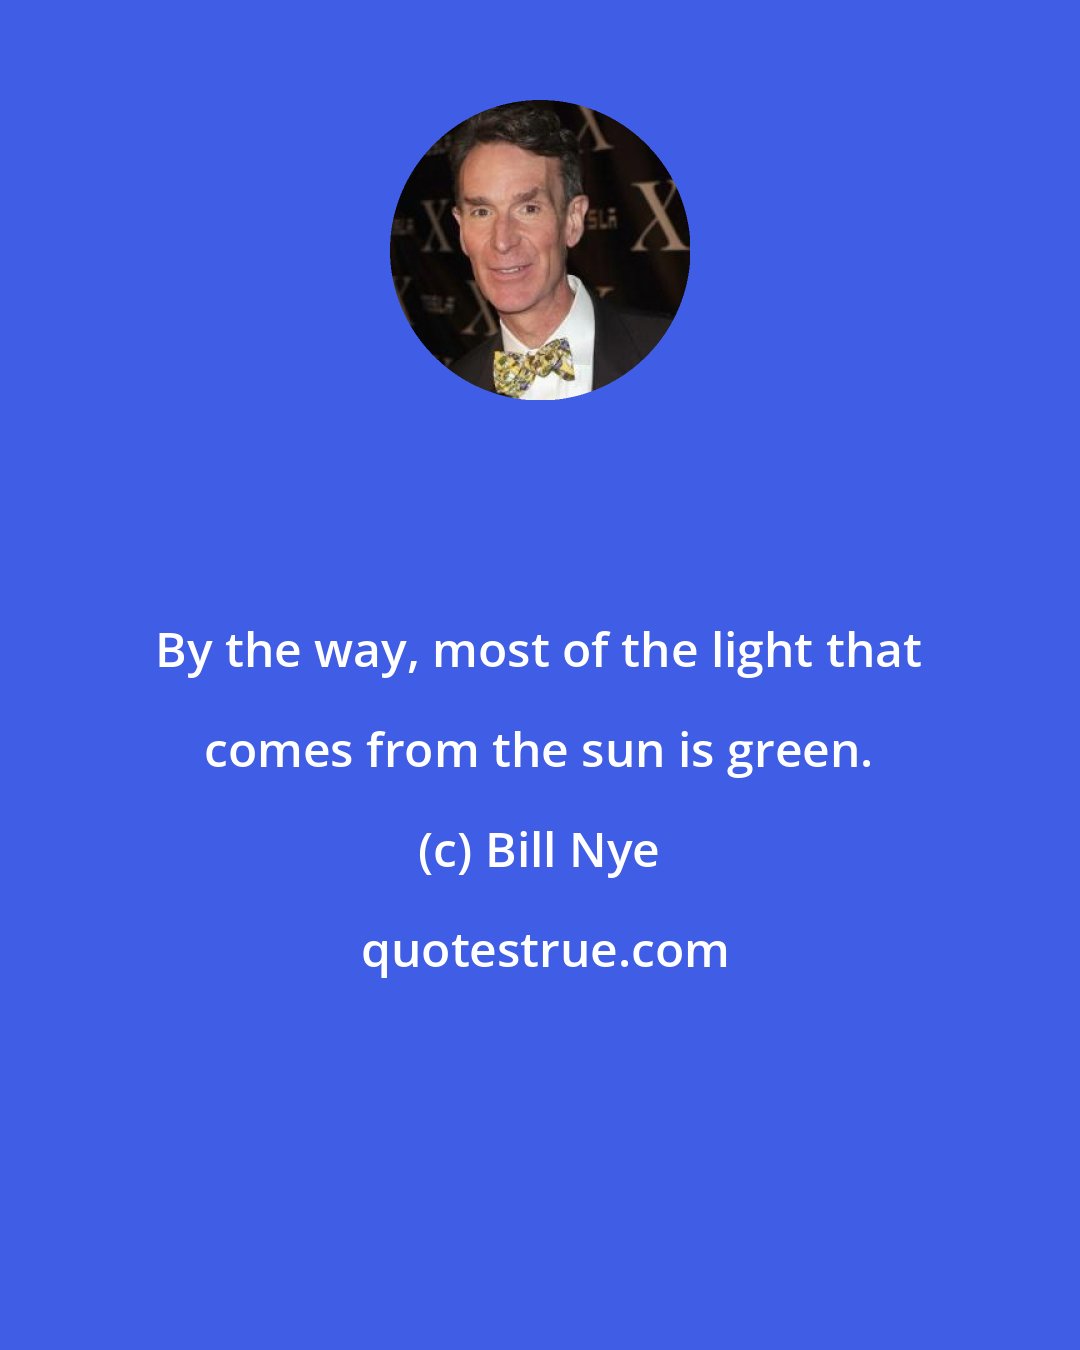 Bill Nye: By the way, most of the light that comes from the sun is green.